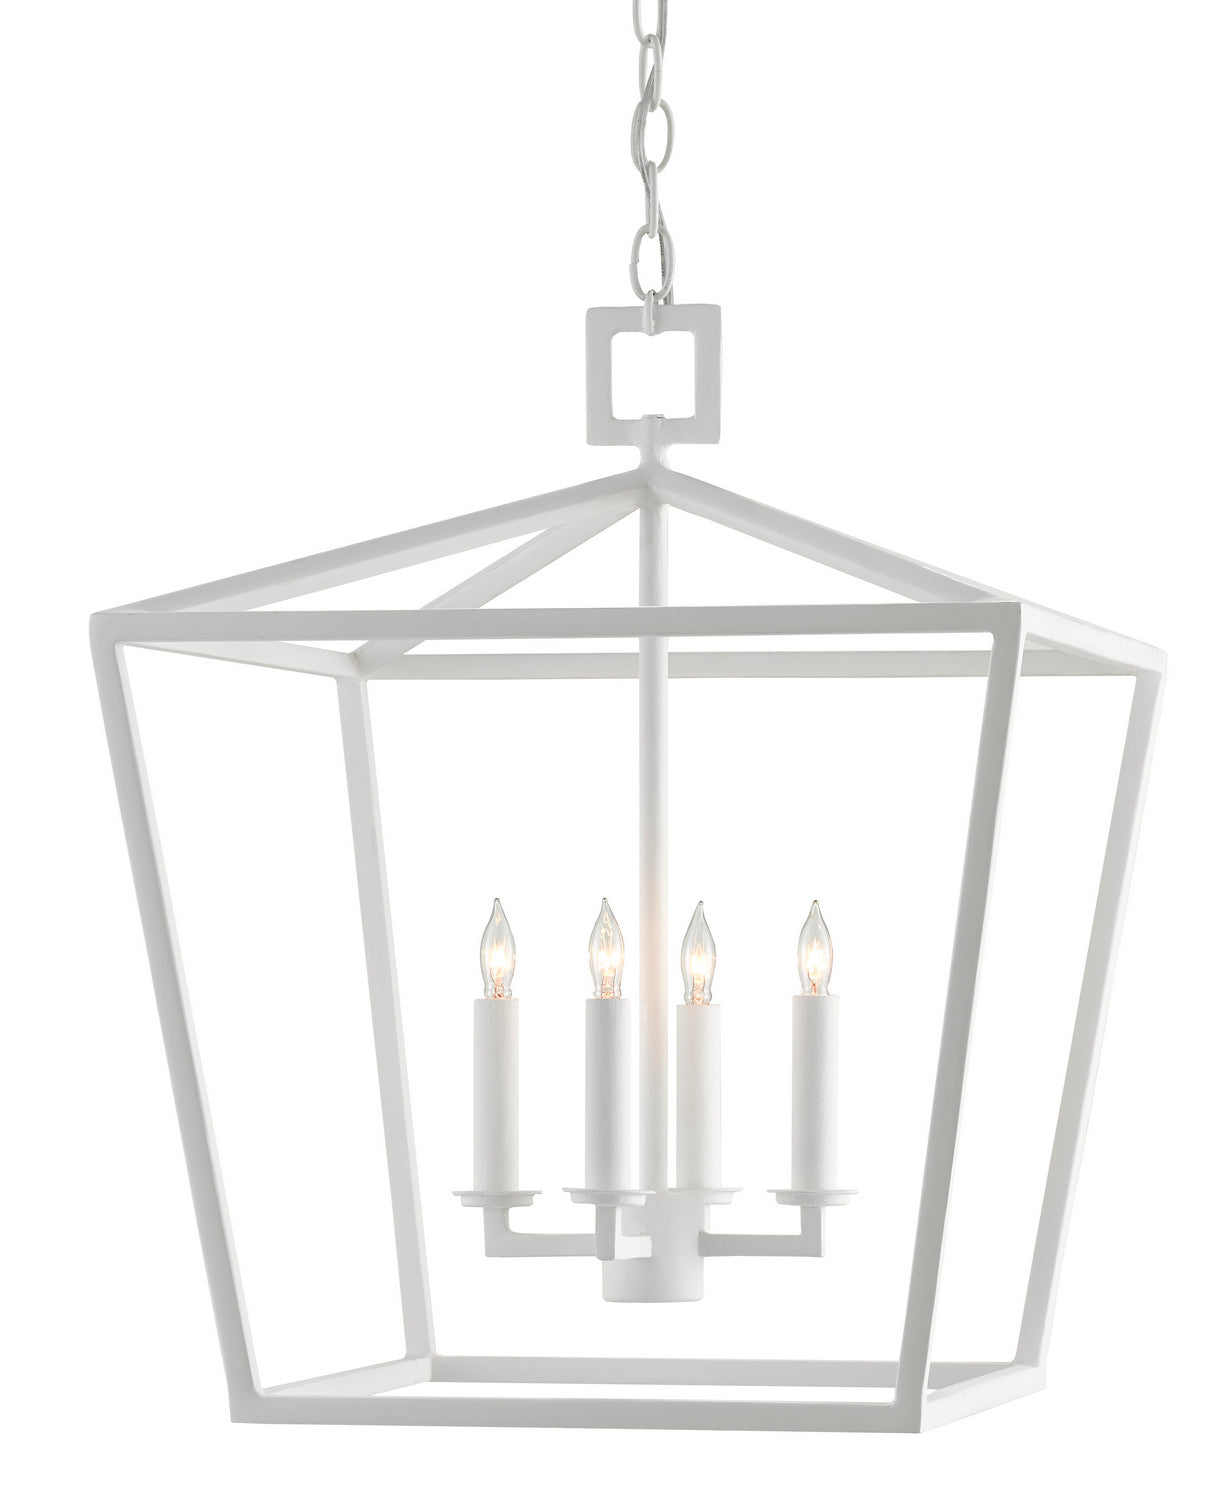 Four Light Lantern from the Denison collection in Gesso White finish